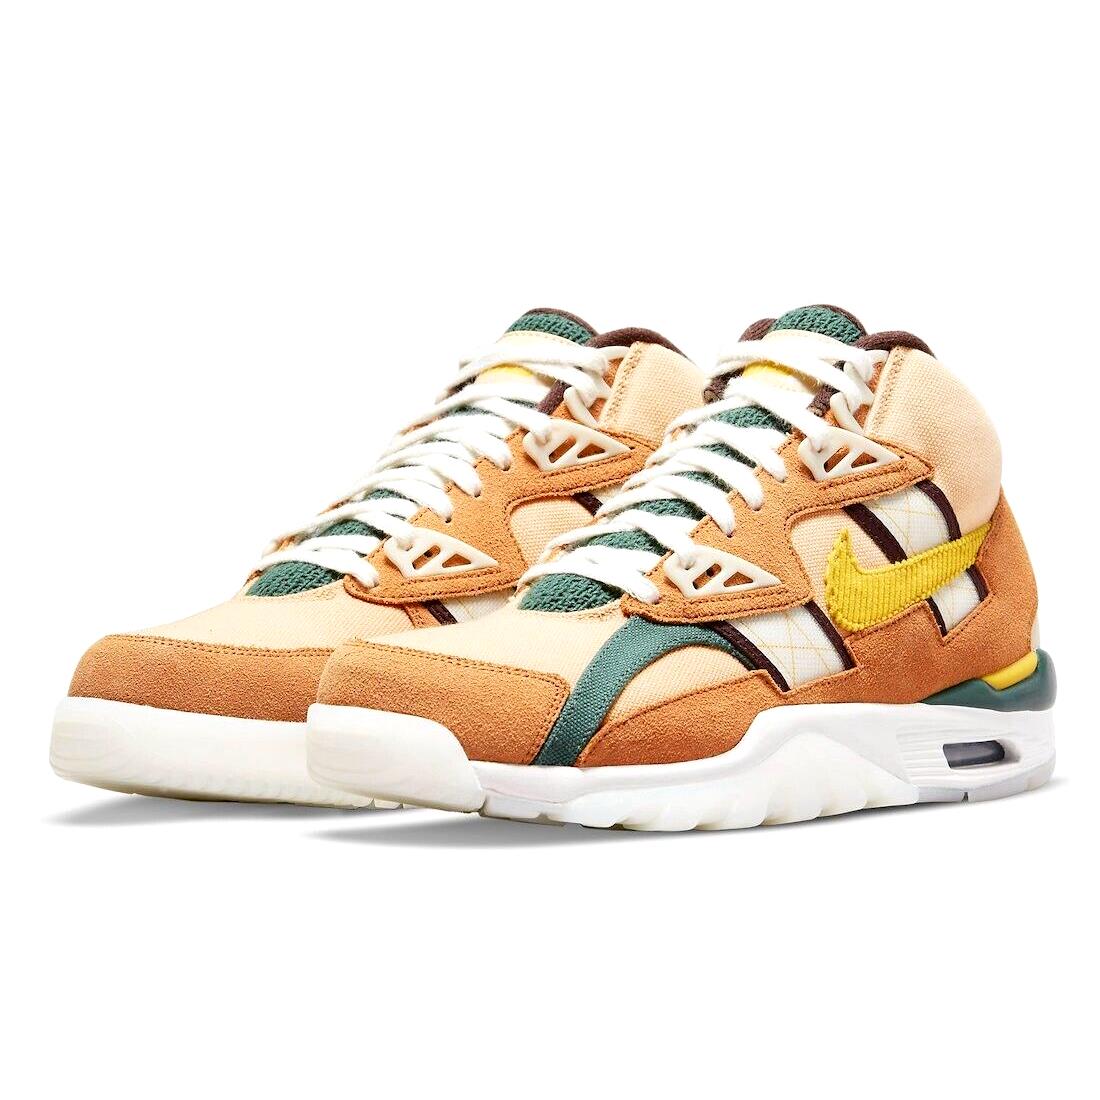 Nike Air Trainer SC High Mens Size 9 Shoes DO6696 700 Brown Pollen Yellow - Brown